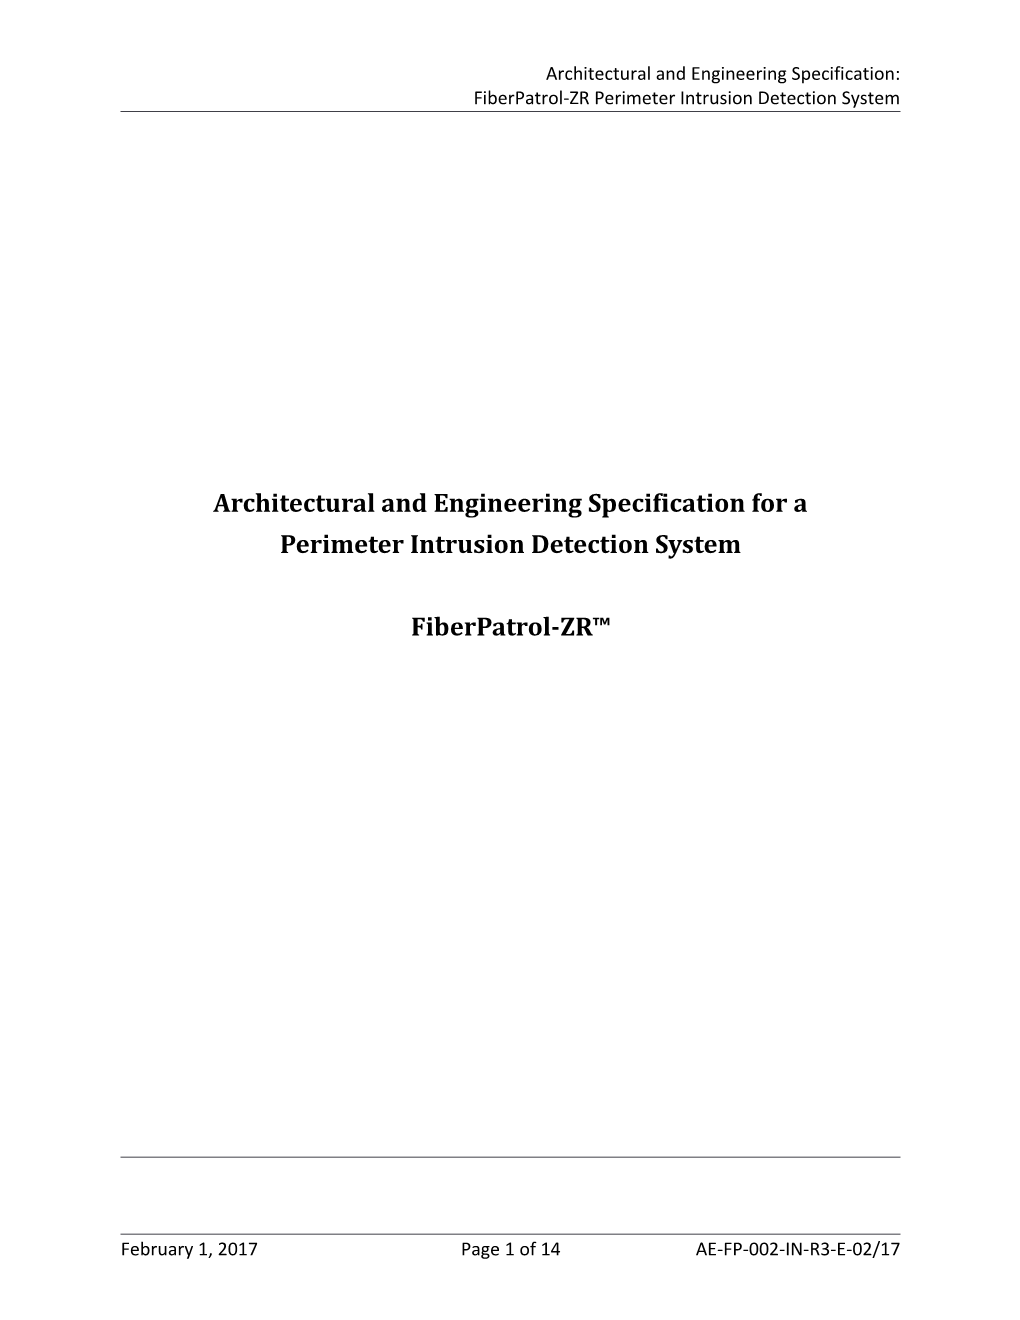 Architectural and Engineering Specification s2